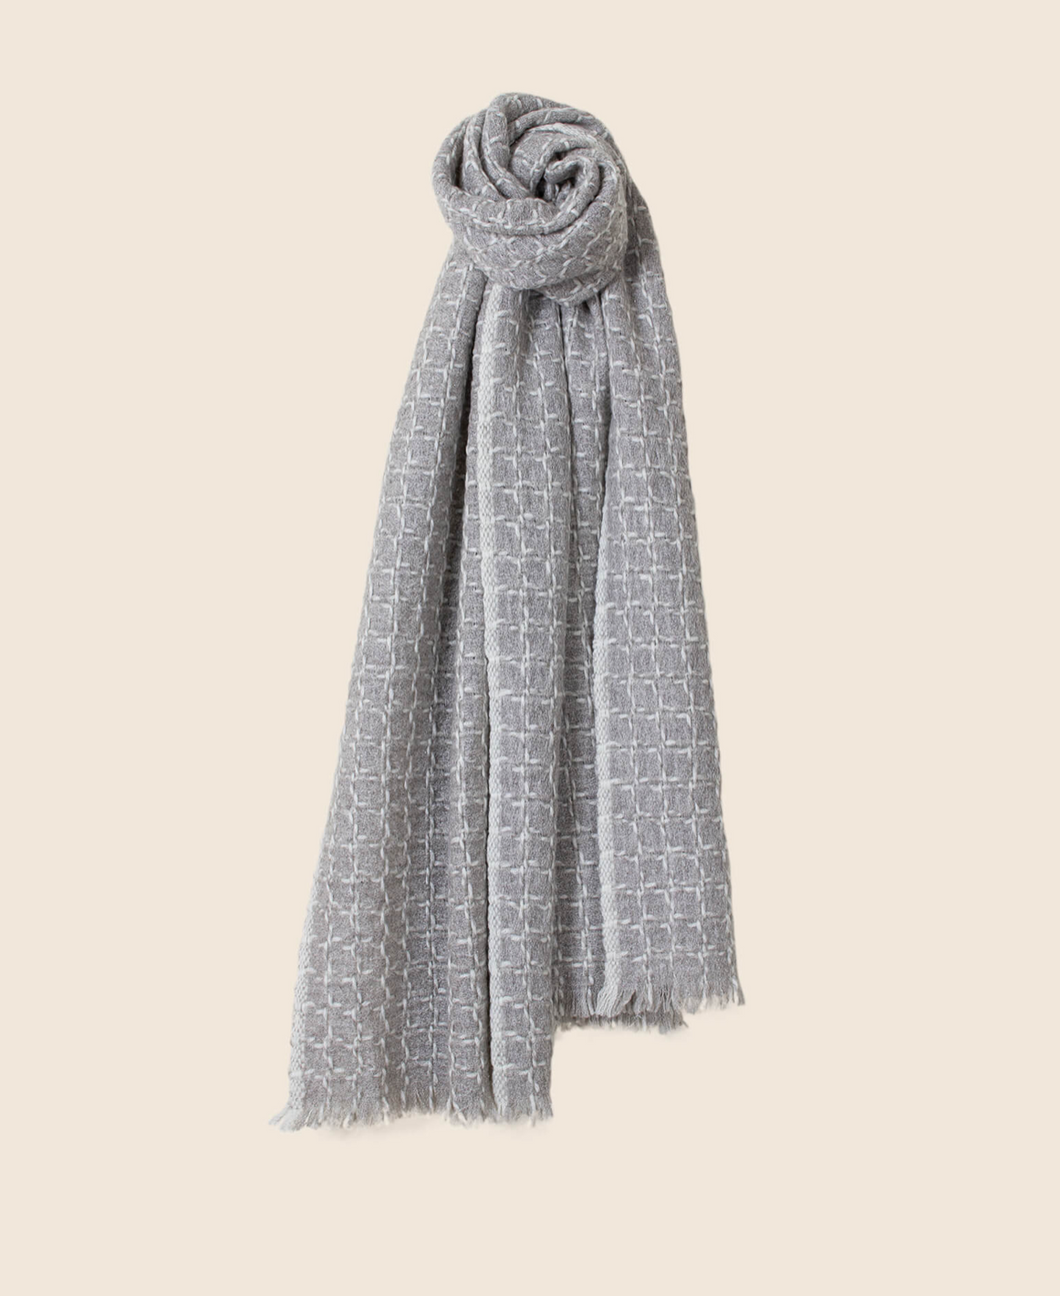 Oats & Rice Grid Cashmere Scarf in Smoke Grey